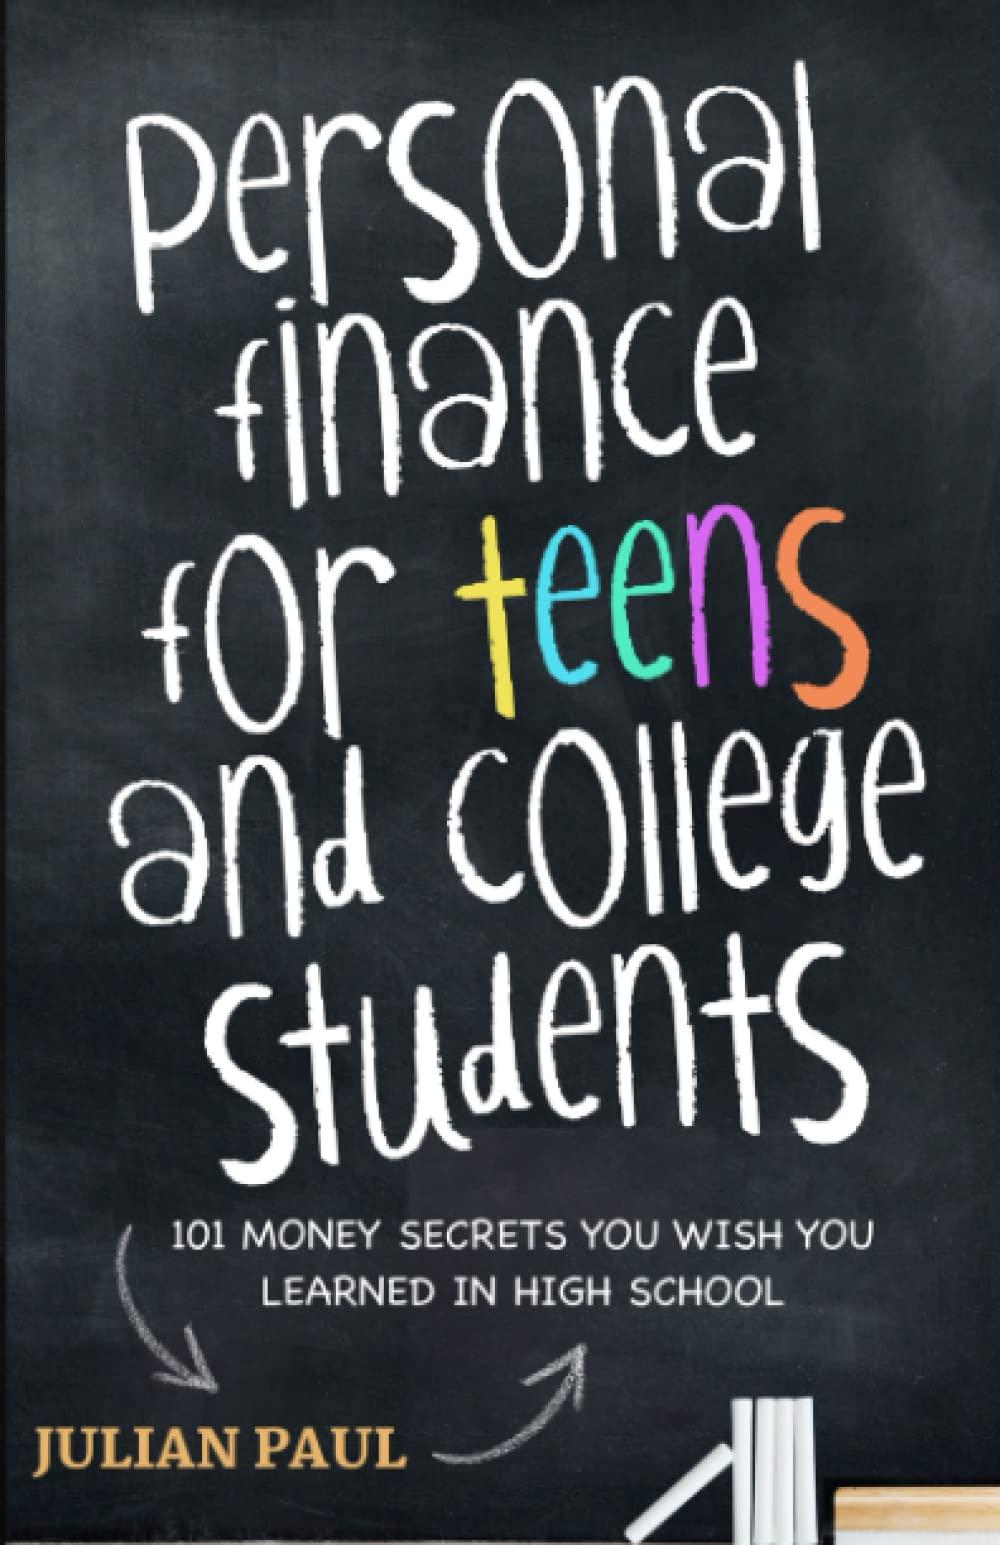 personal finance for teens and college students 101 money secrets you wish you learned in high school 1st